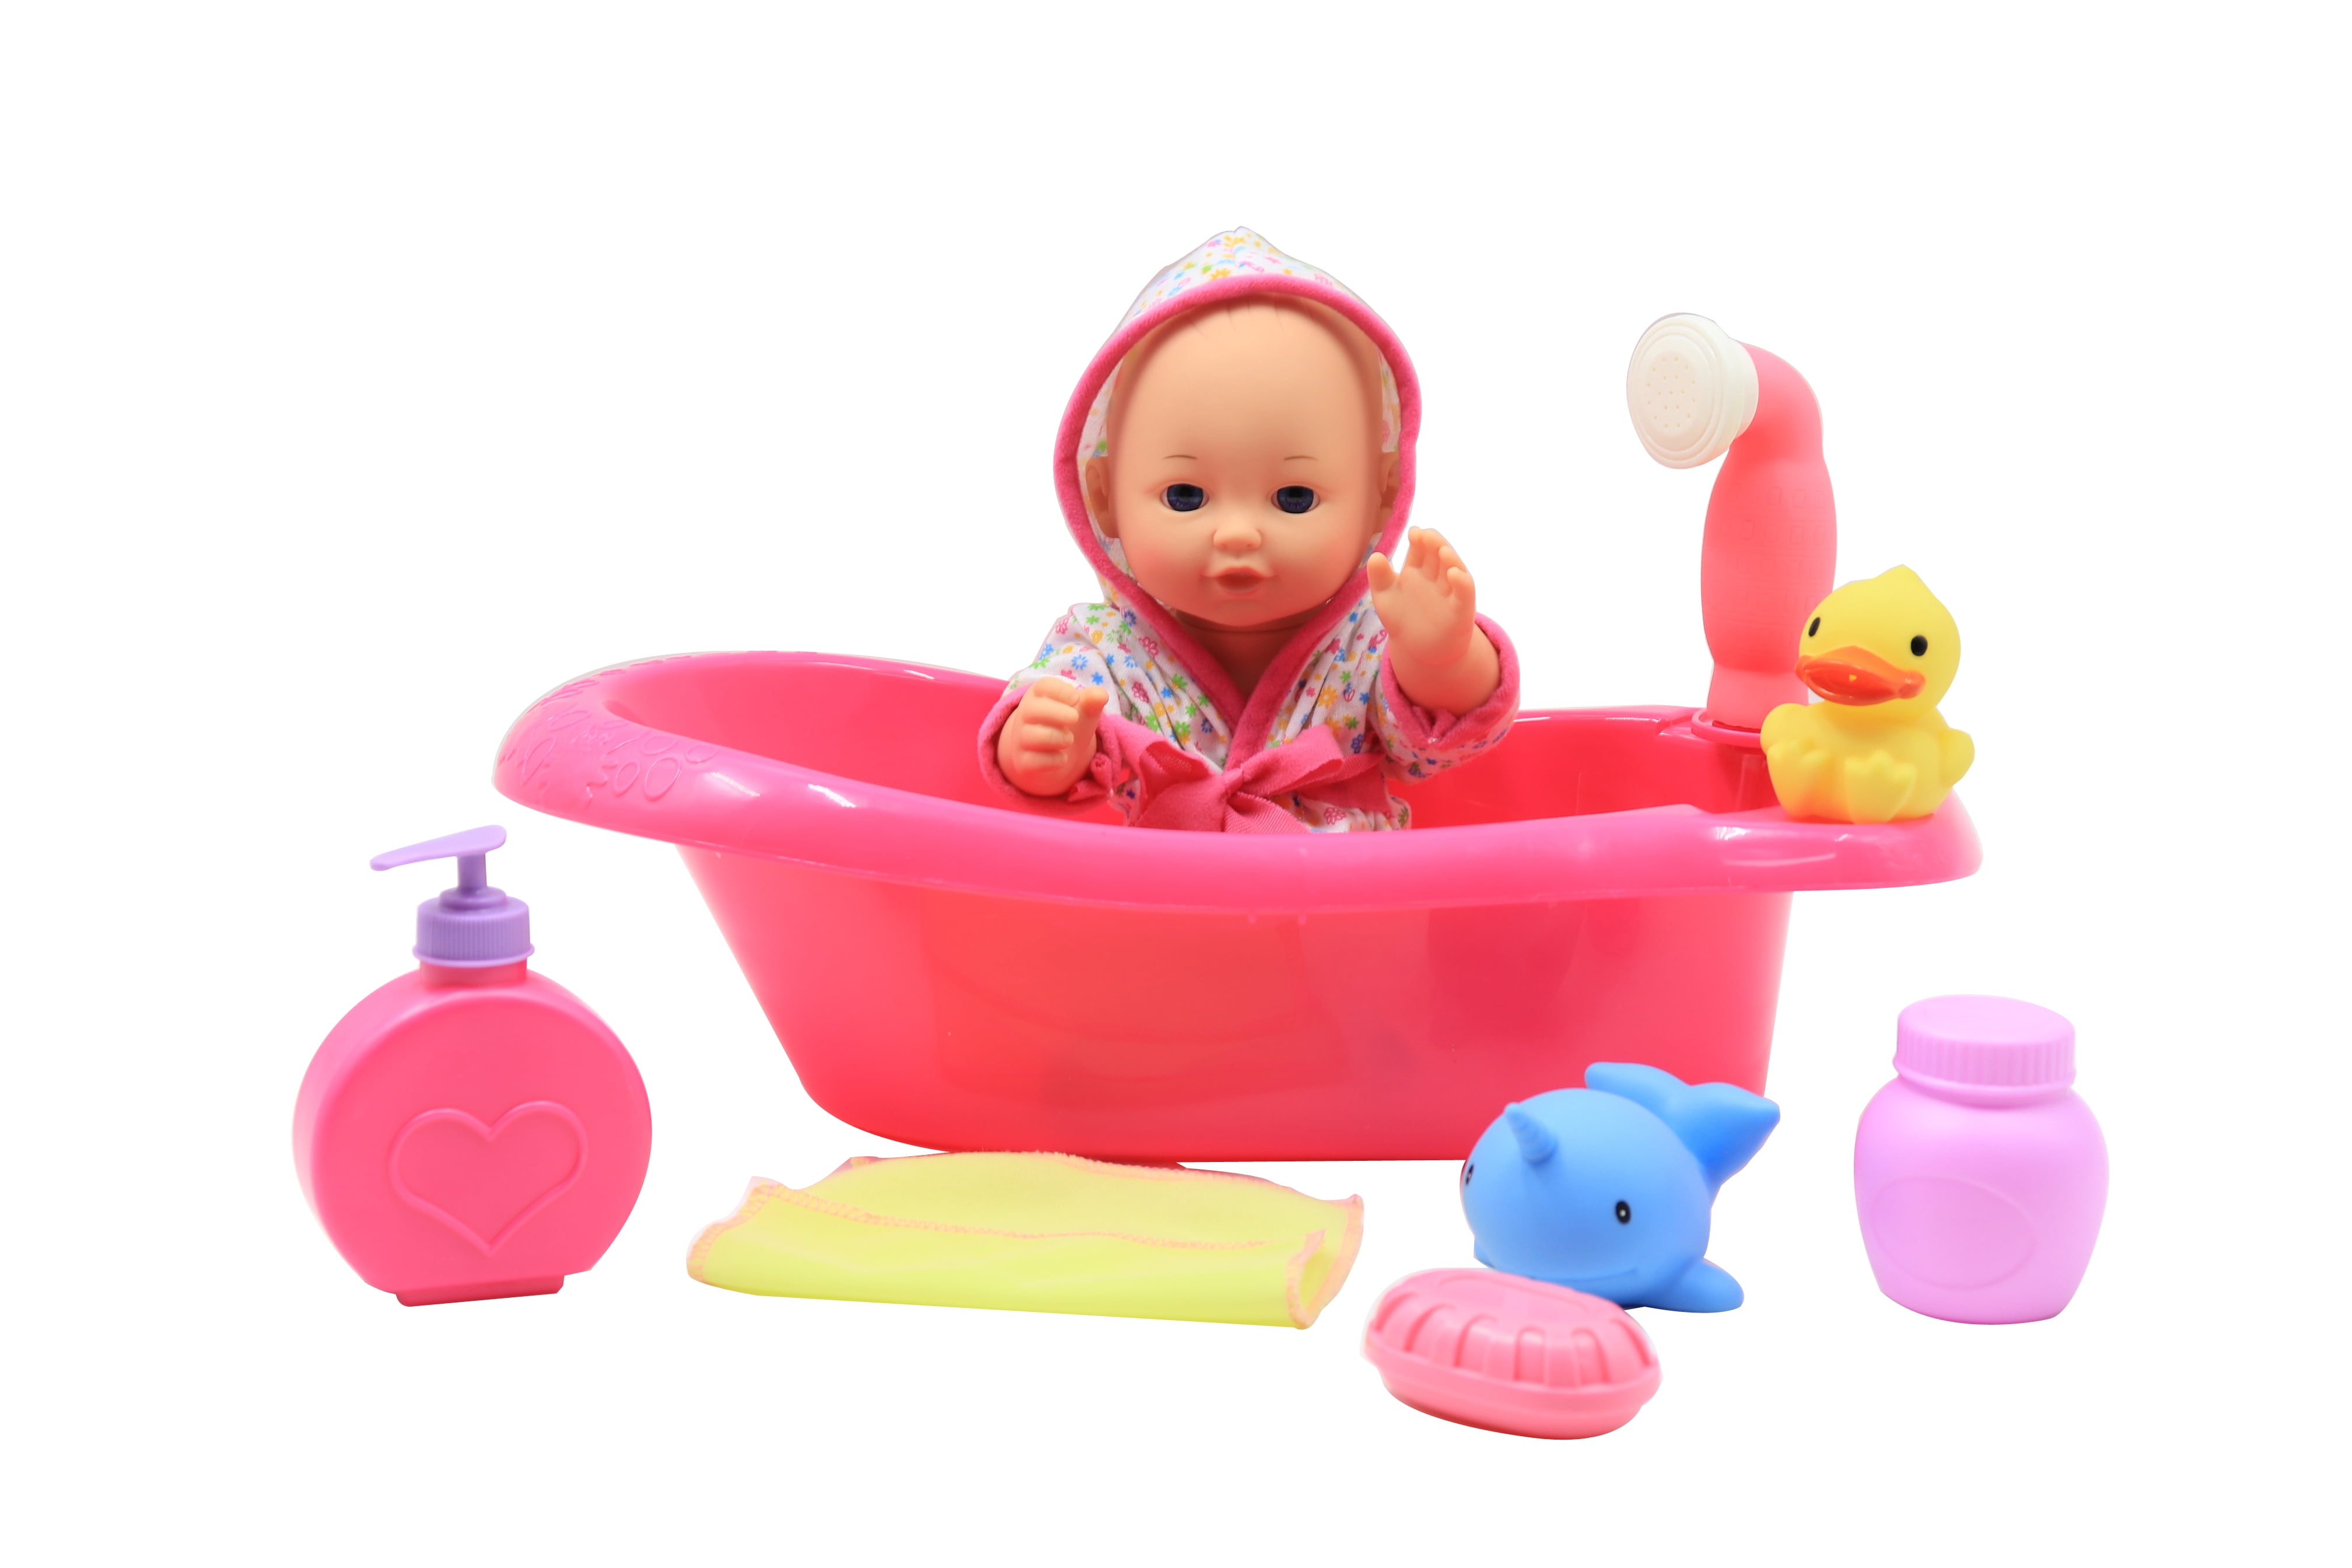 My Sweet Love Lots to Love 5" Baby Doll Mini Bath Play Set New ⚡Fast Shipping 